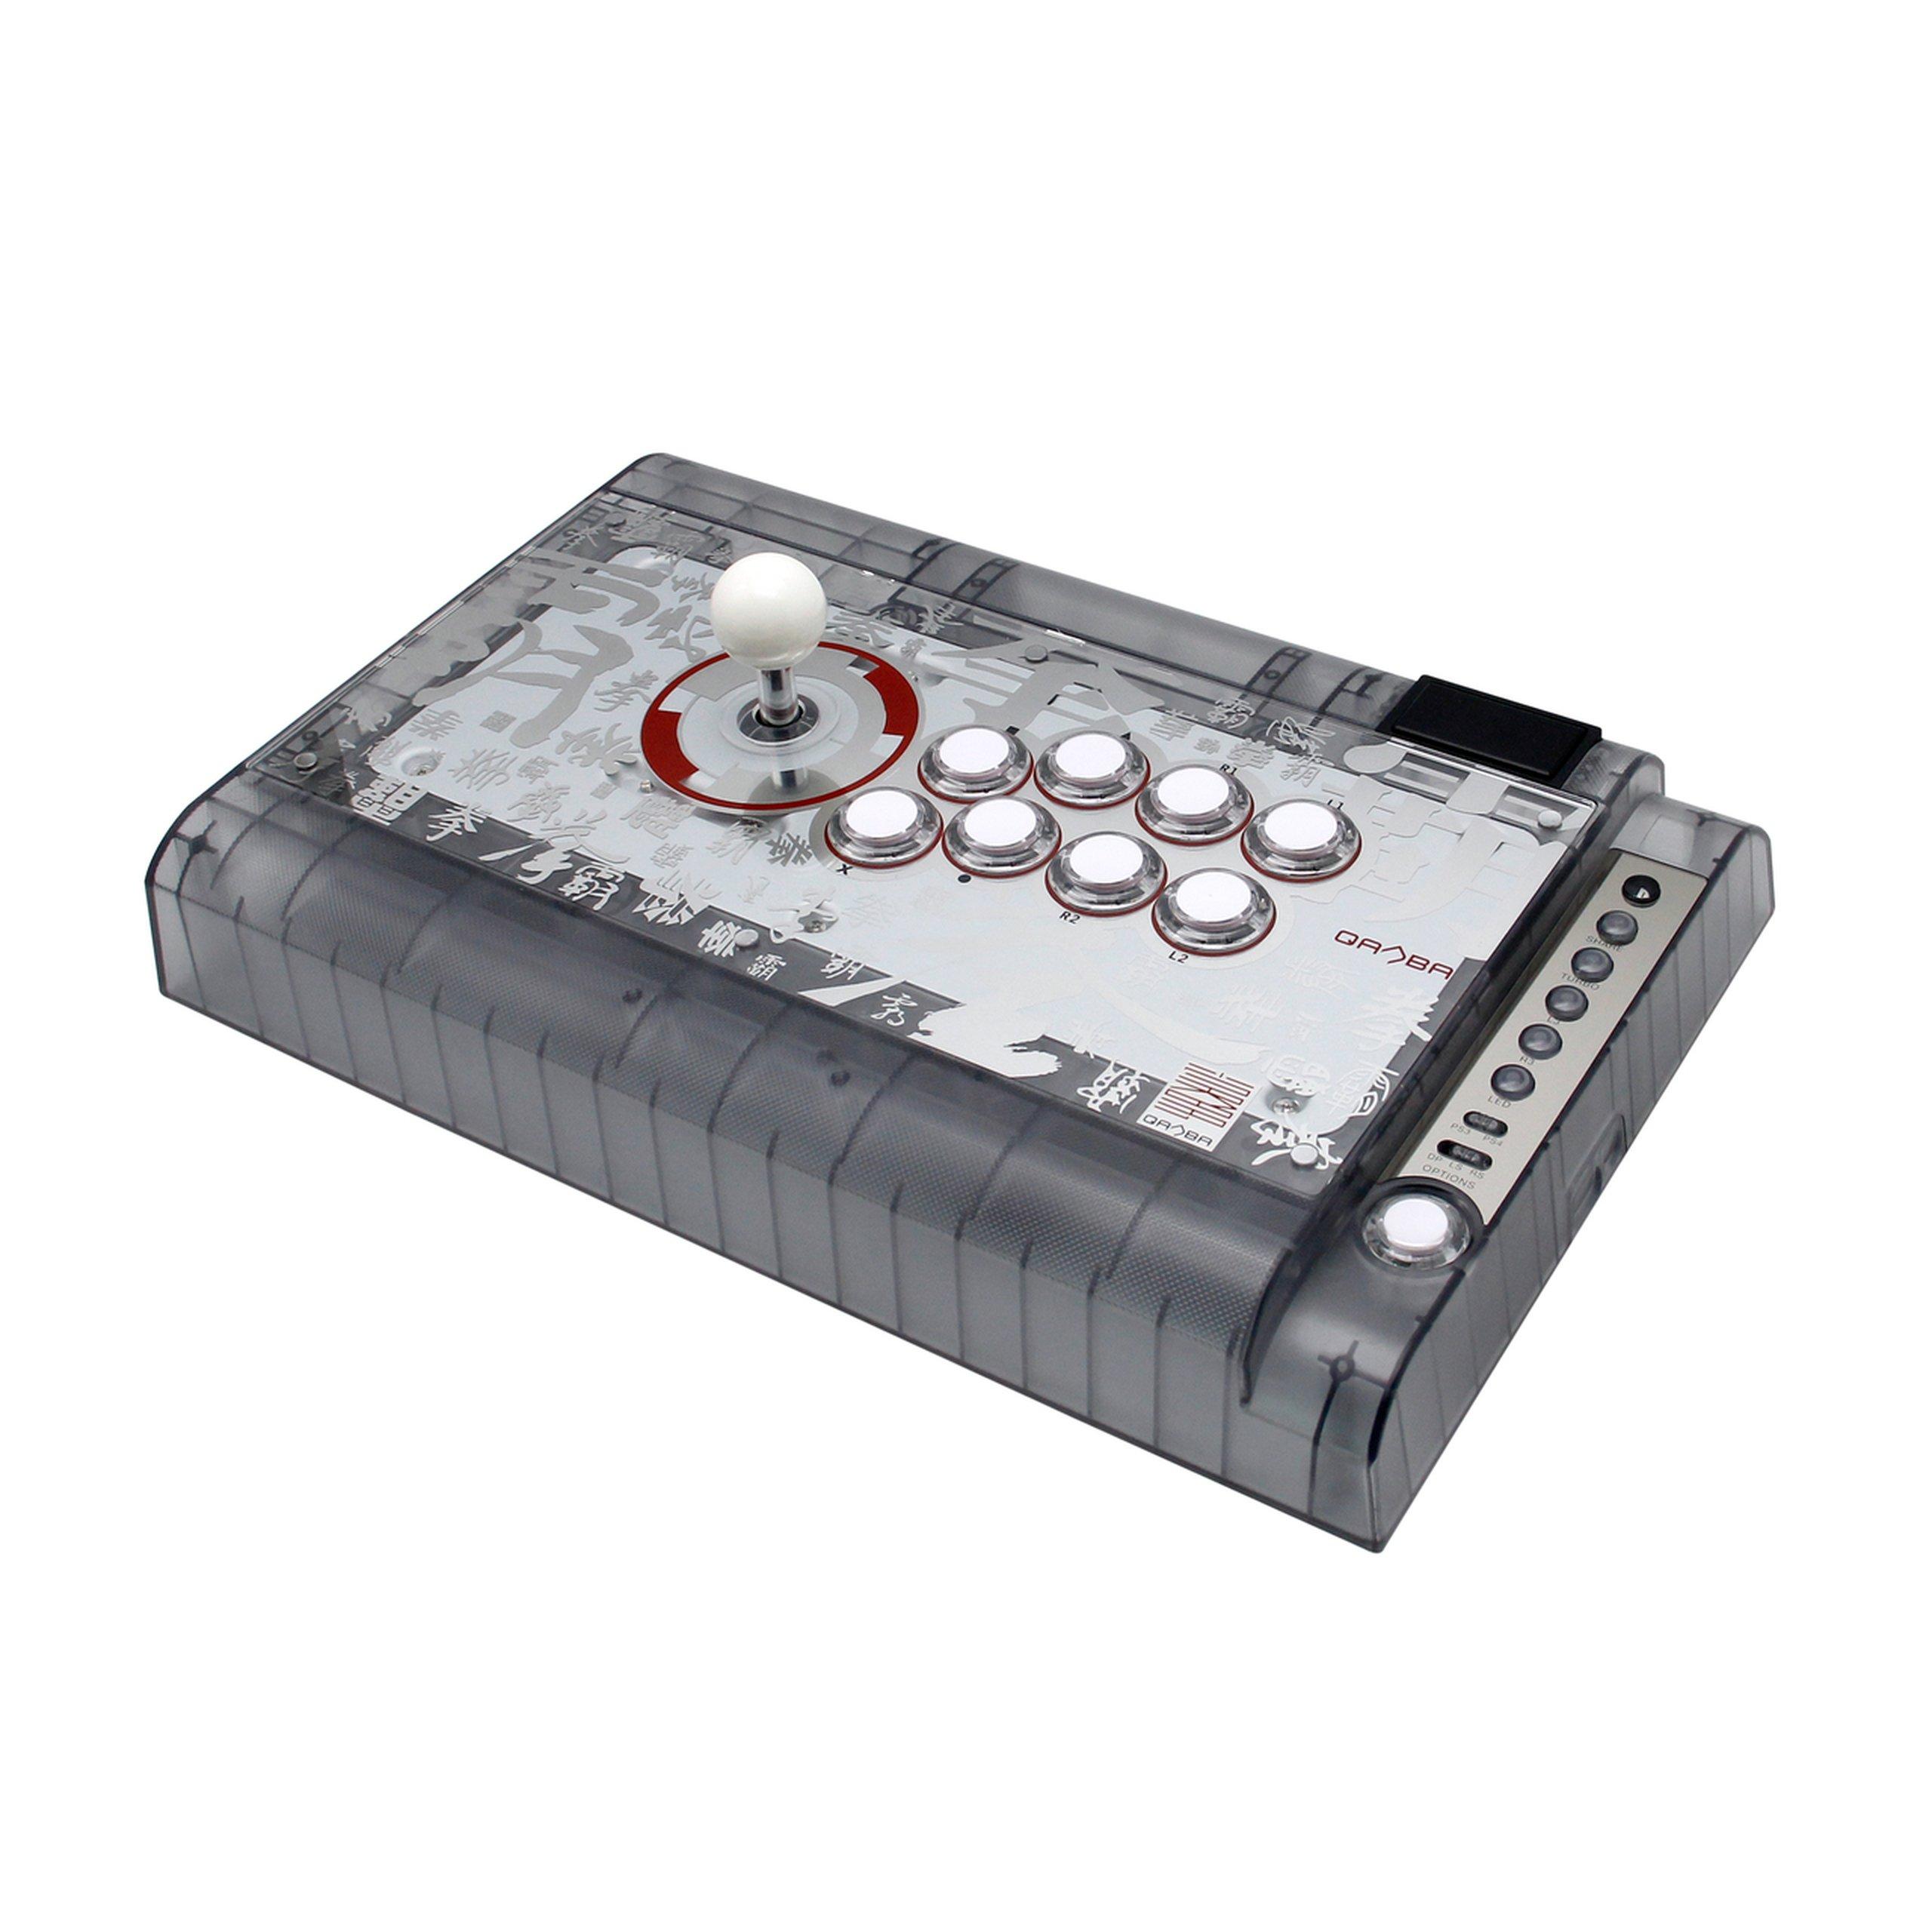 Crystal Fight Stick for PlayStation 4, PlayStation 3, and PC